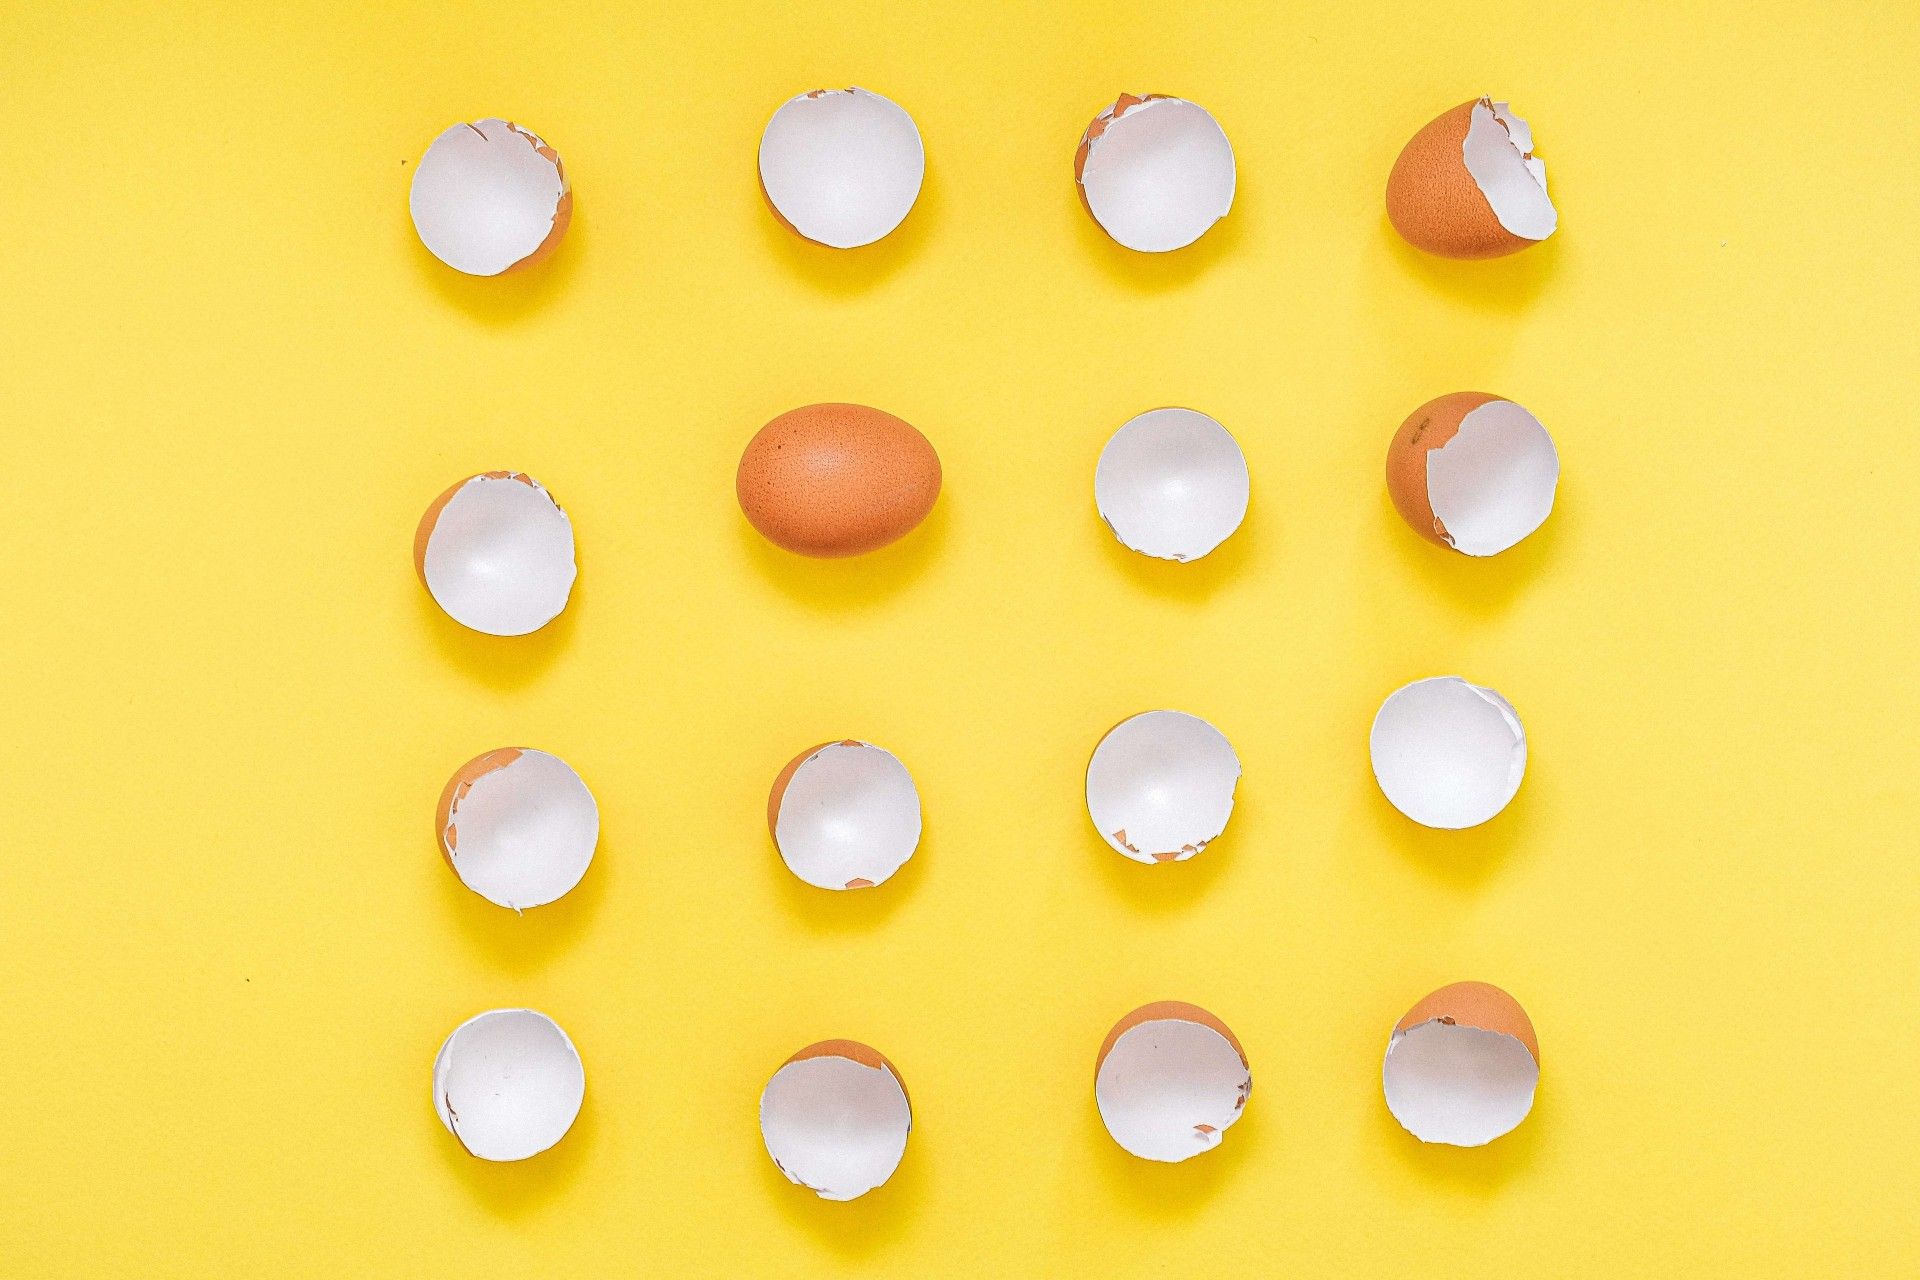 unique value proposition concept with eggs and eggshells on yellow background